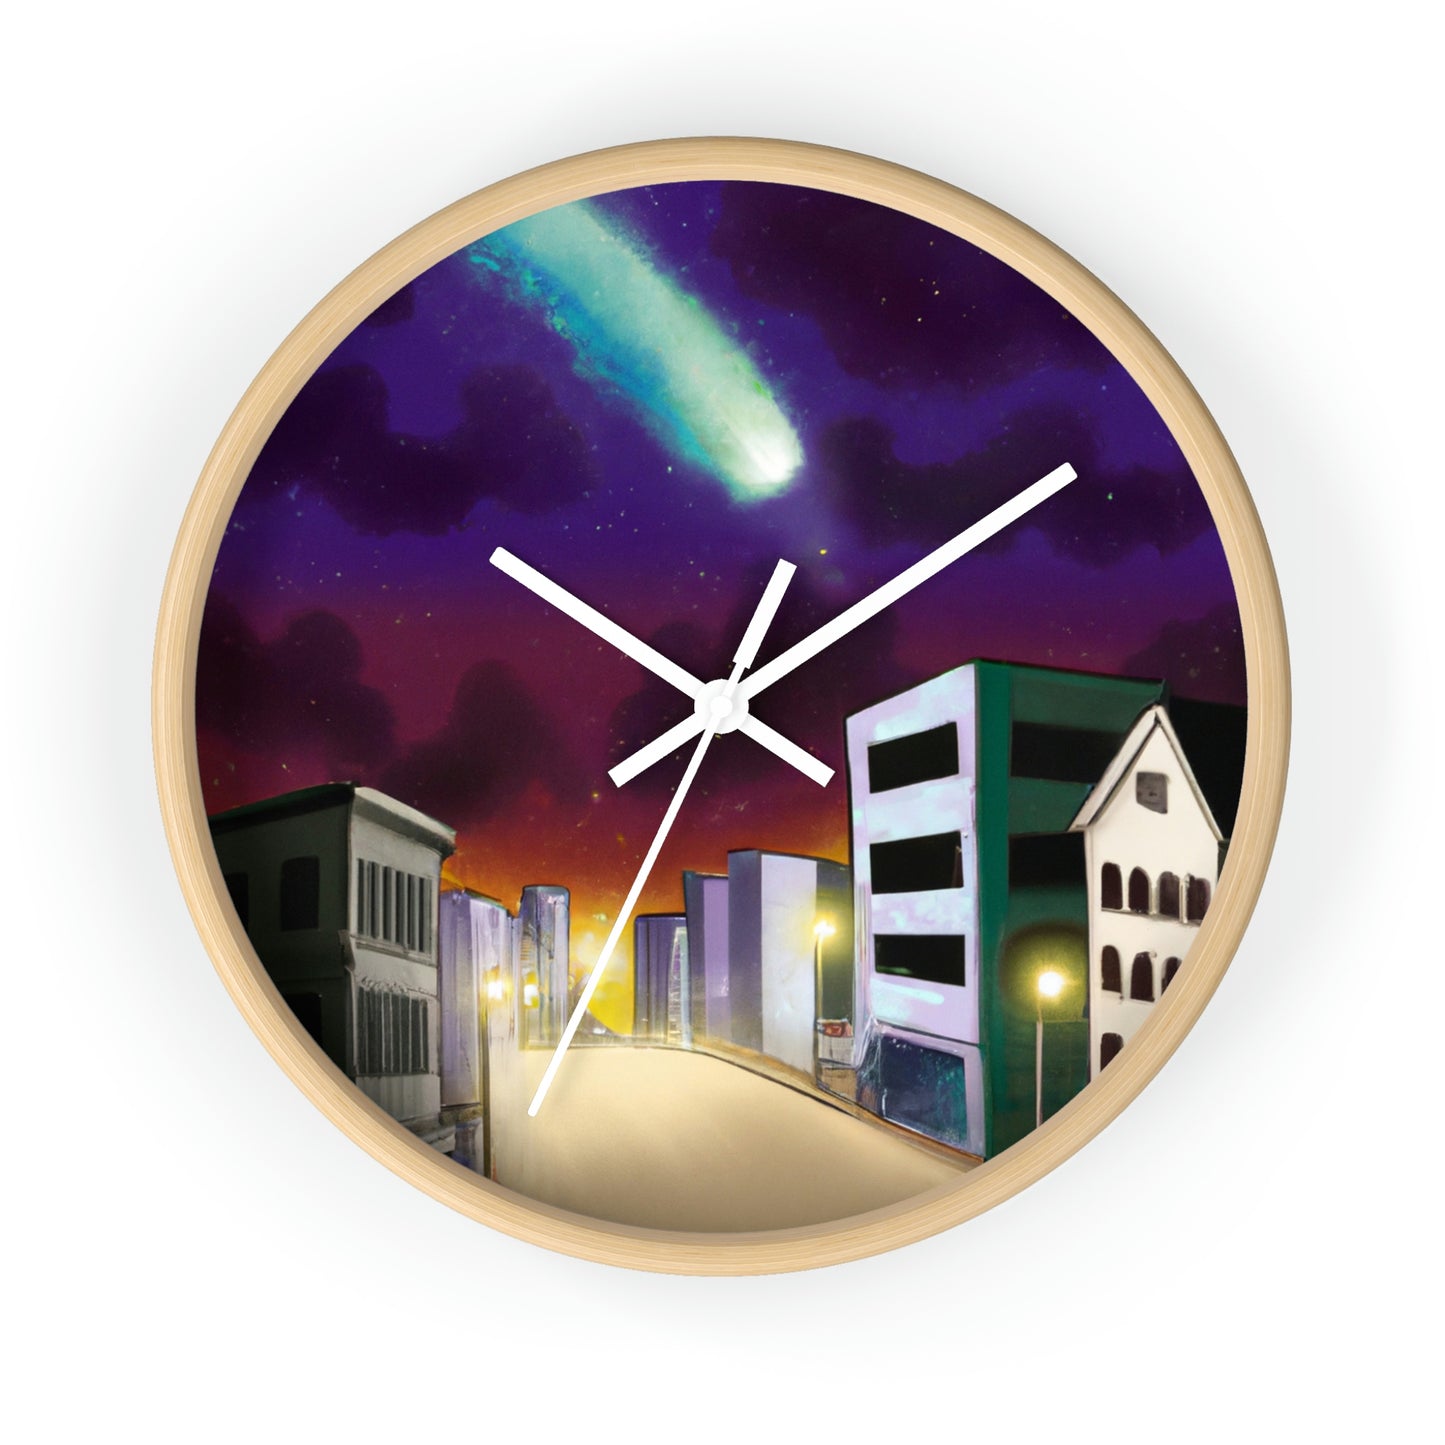 "The Comet's Transformation" - The Alien Wall Clock